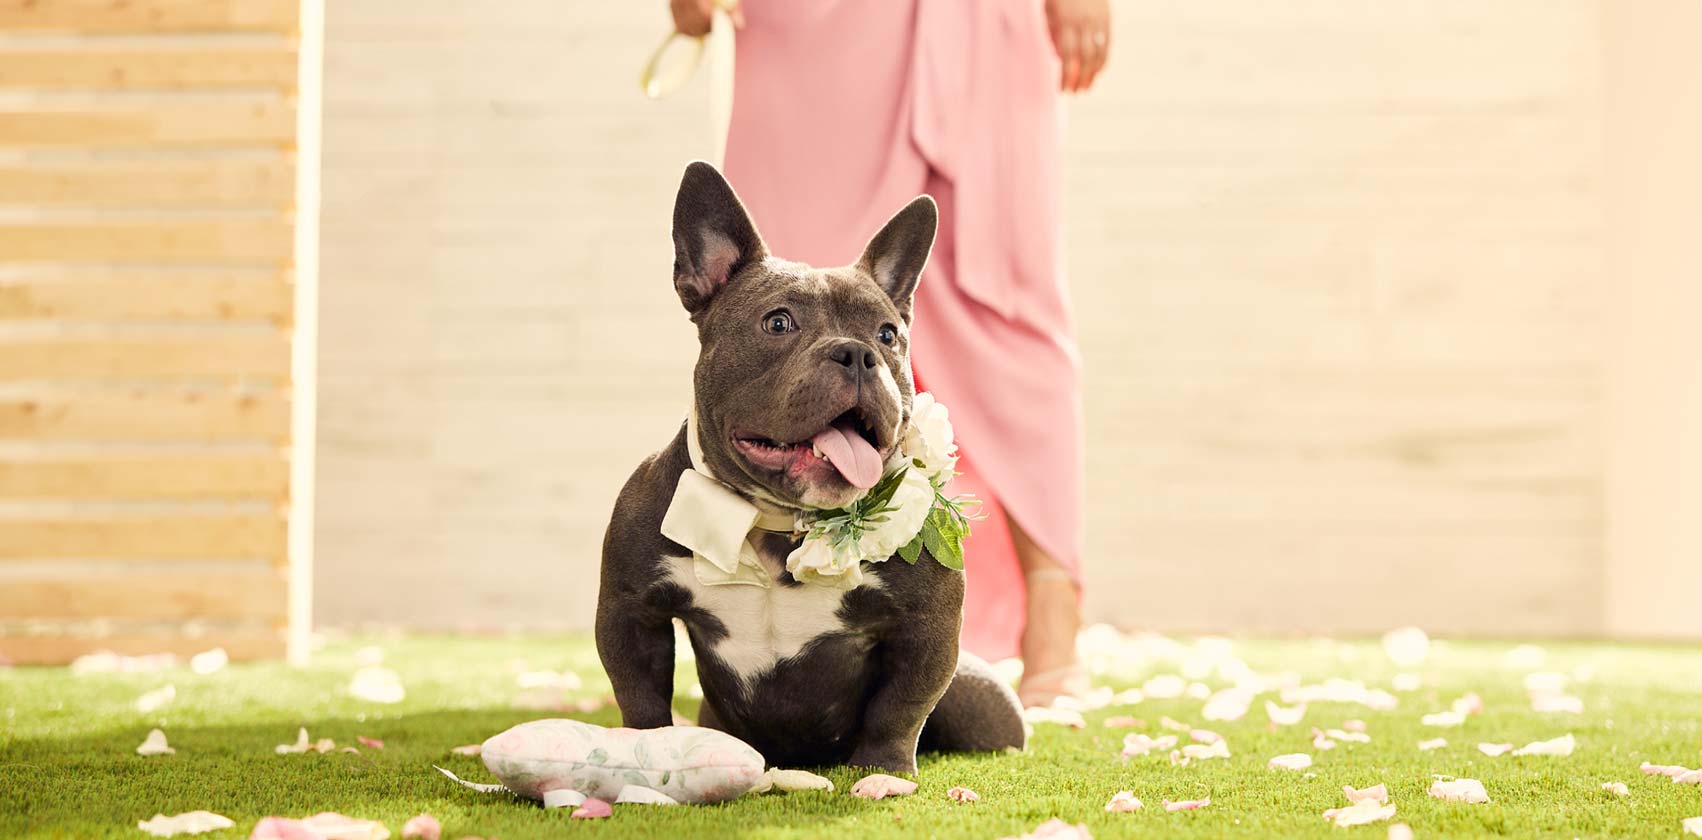 How to pull off a pet-inclusive wedding - A dog sitting in front of his owner in a wedding